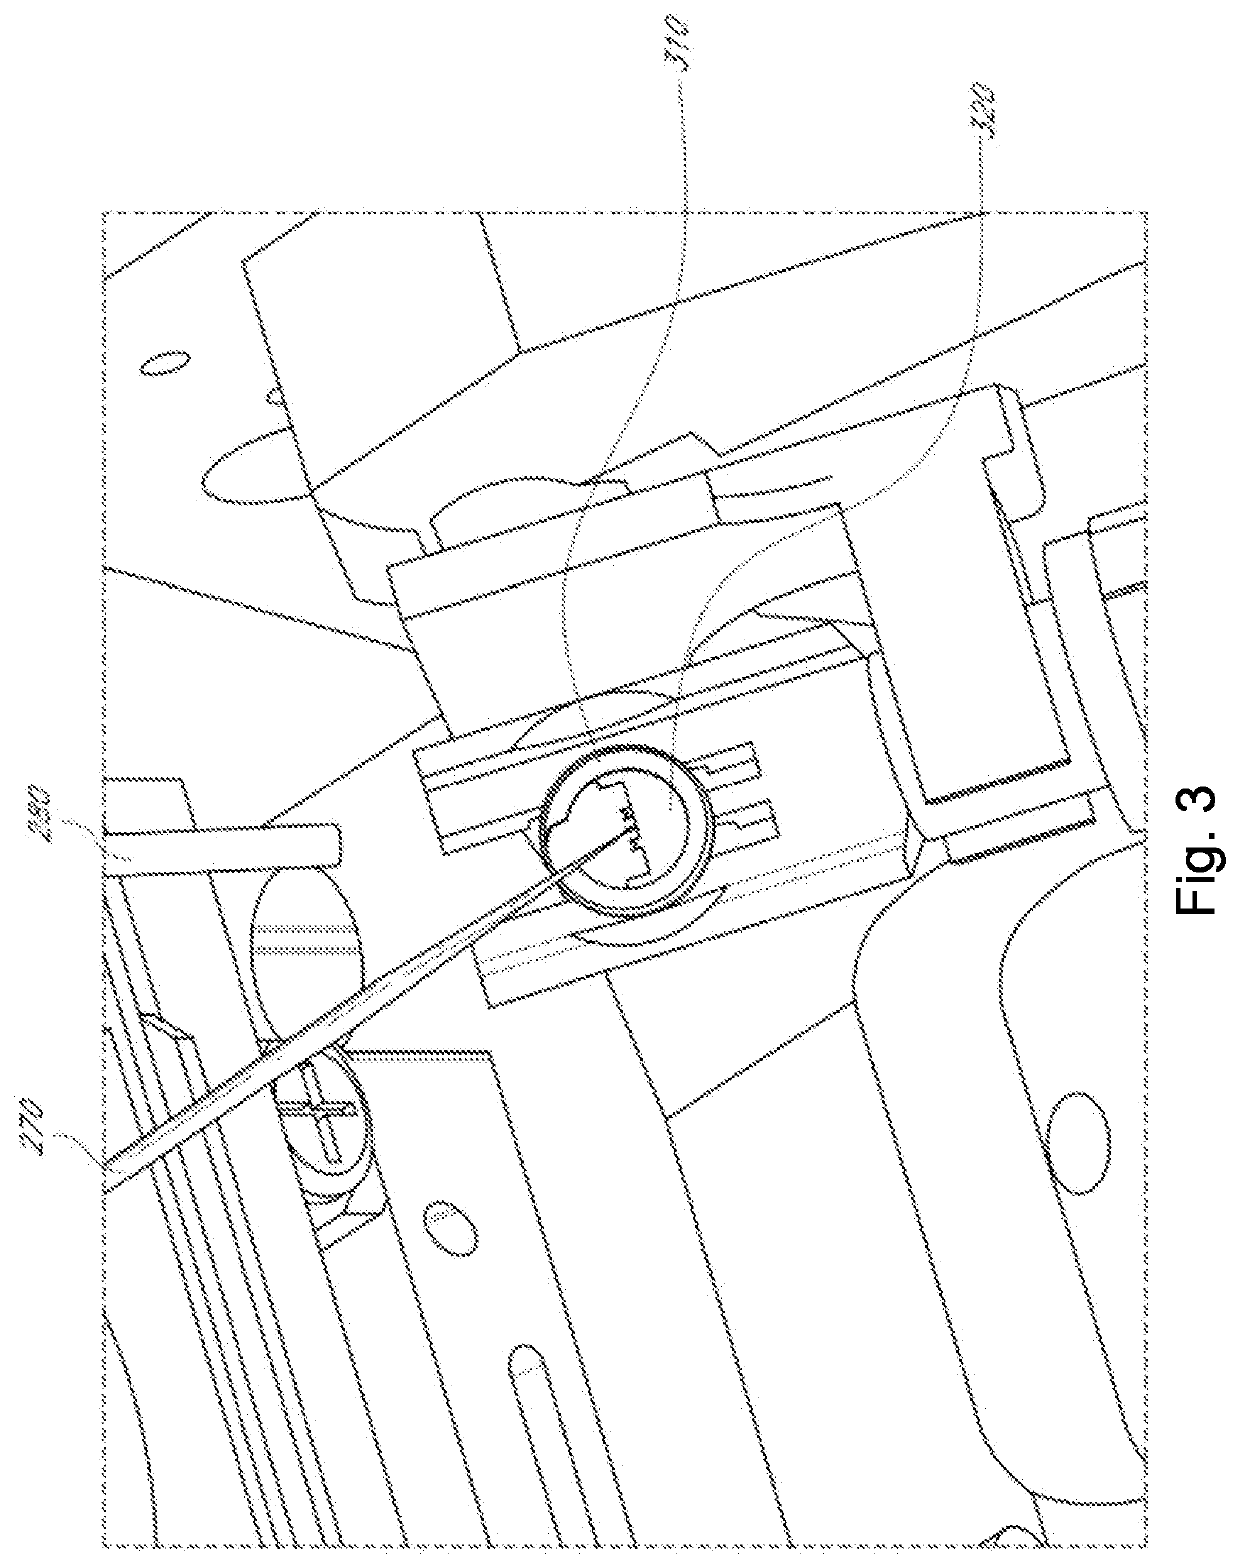 Sample carrier for use in a charged particle microscope, and a method of using such a sample carrier in a charged particle microscope